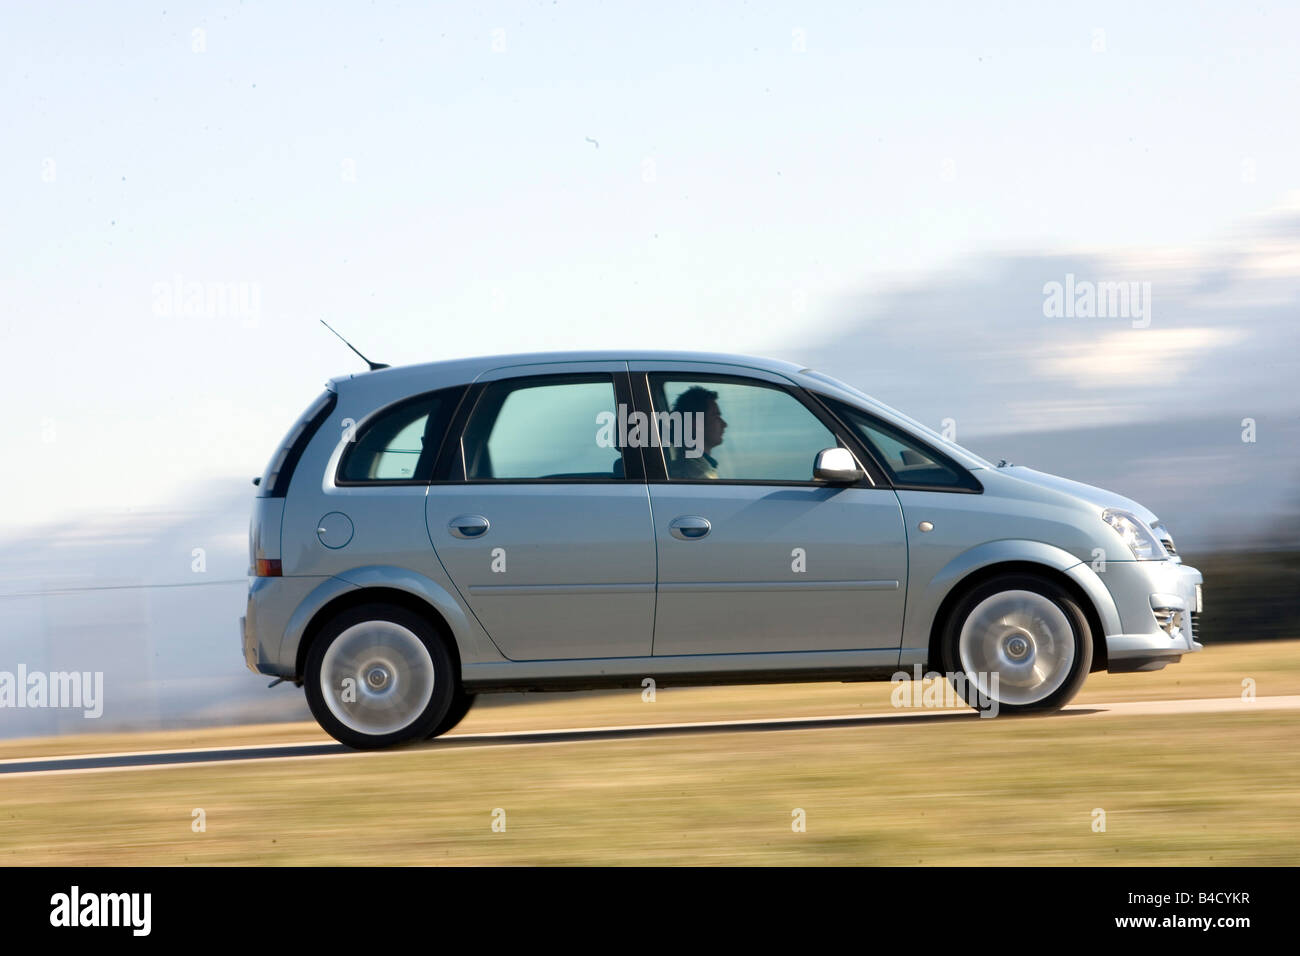 71 Meriva Stock Photos, High-Res Pictures, and Images - Getty Images